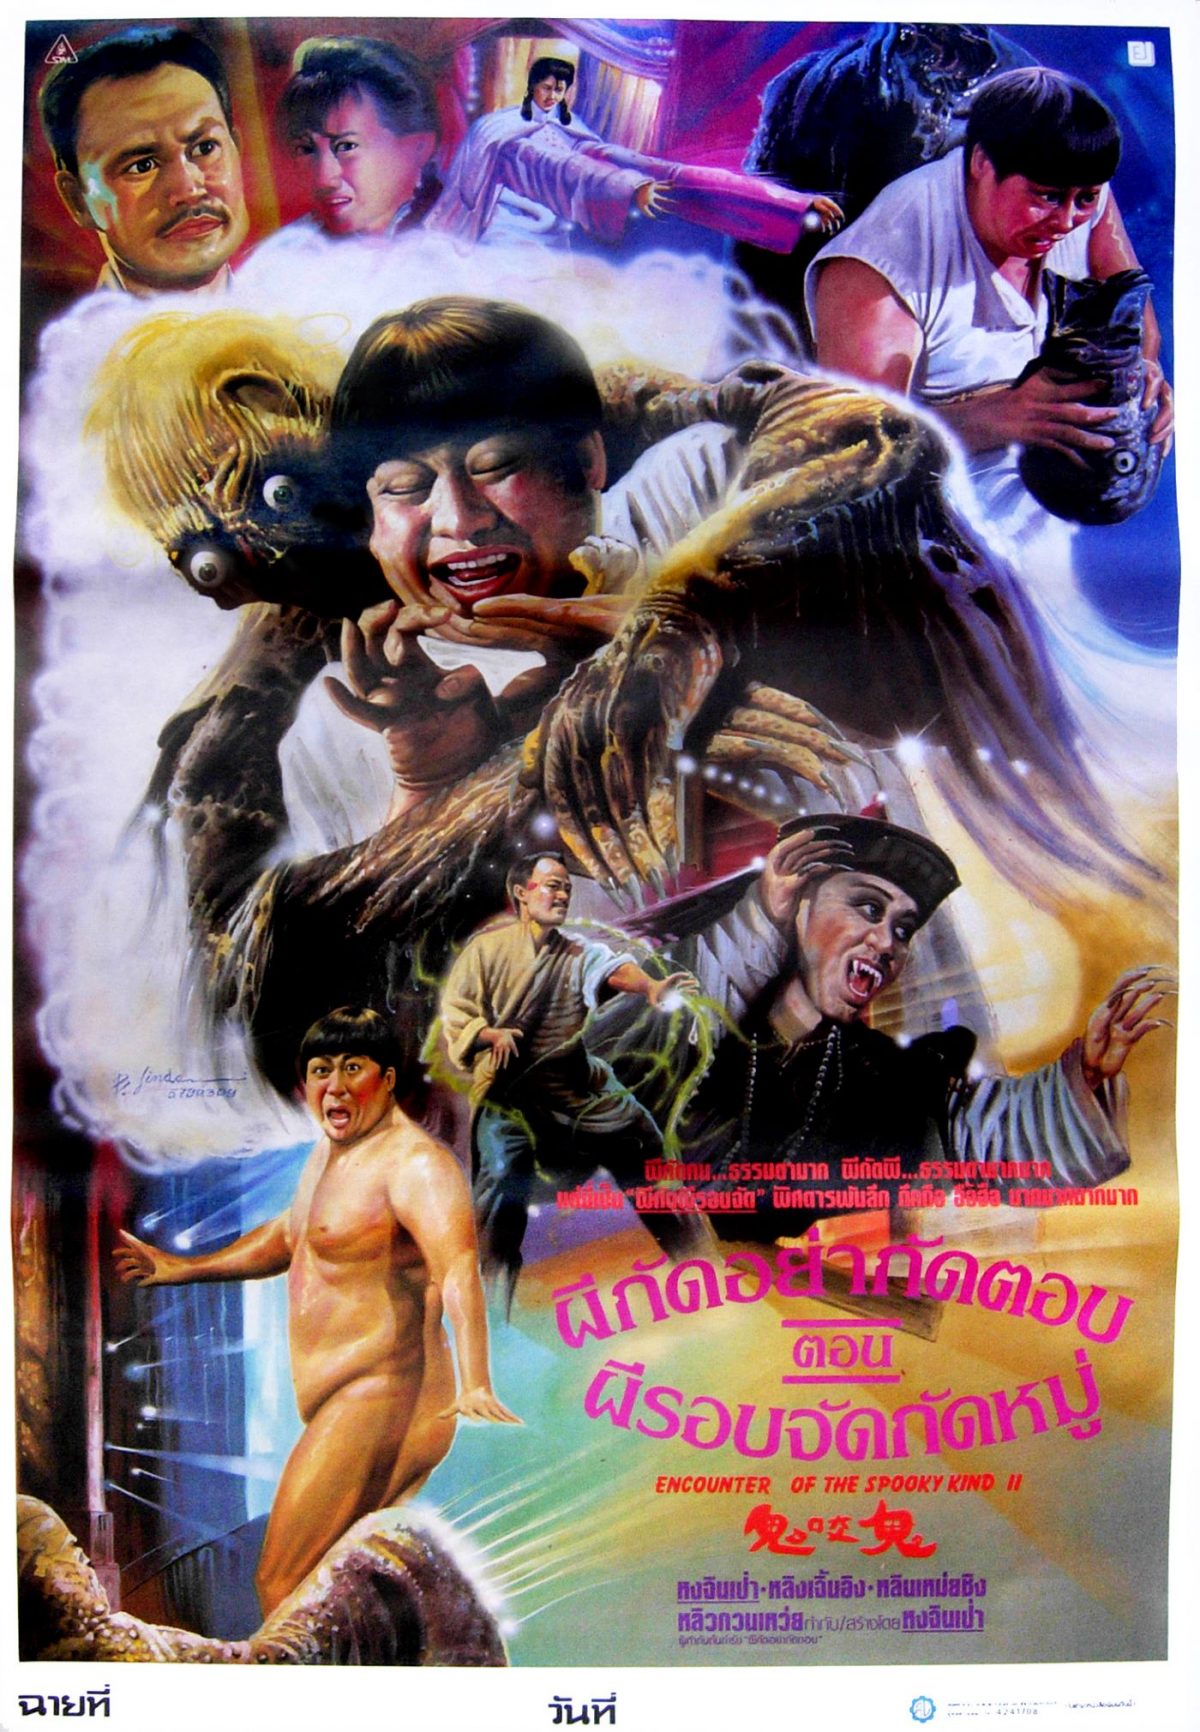 Thailand, movie posters, artwork, Close Encounters of the Spooky Kind II